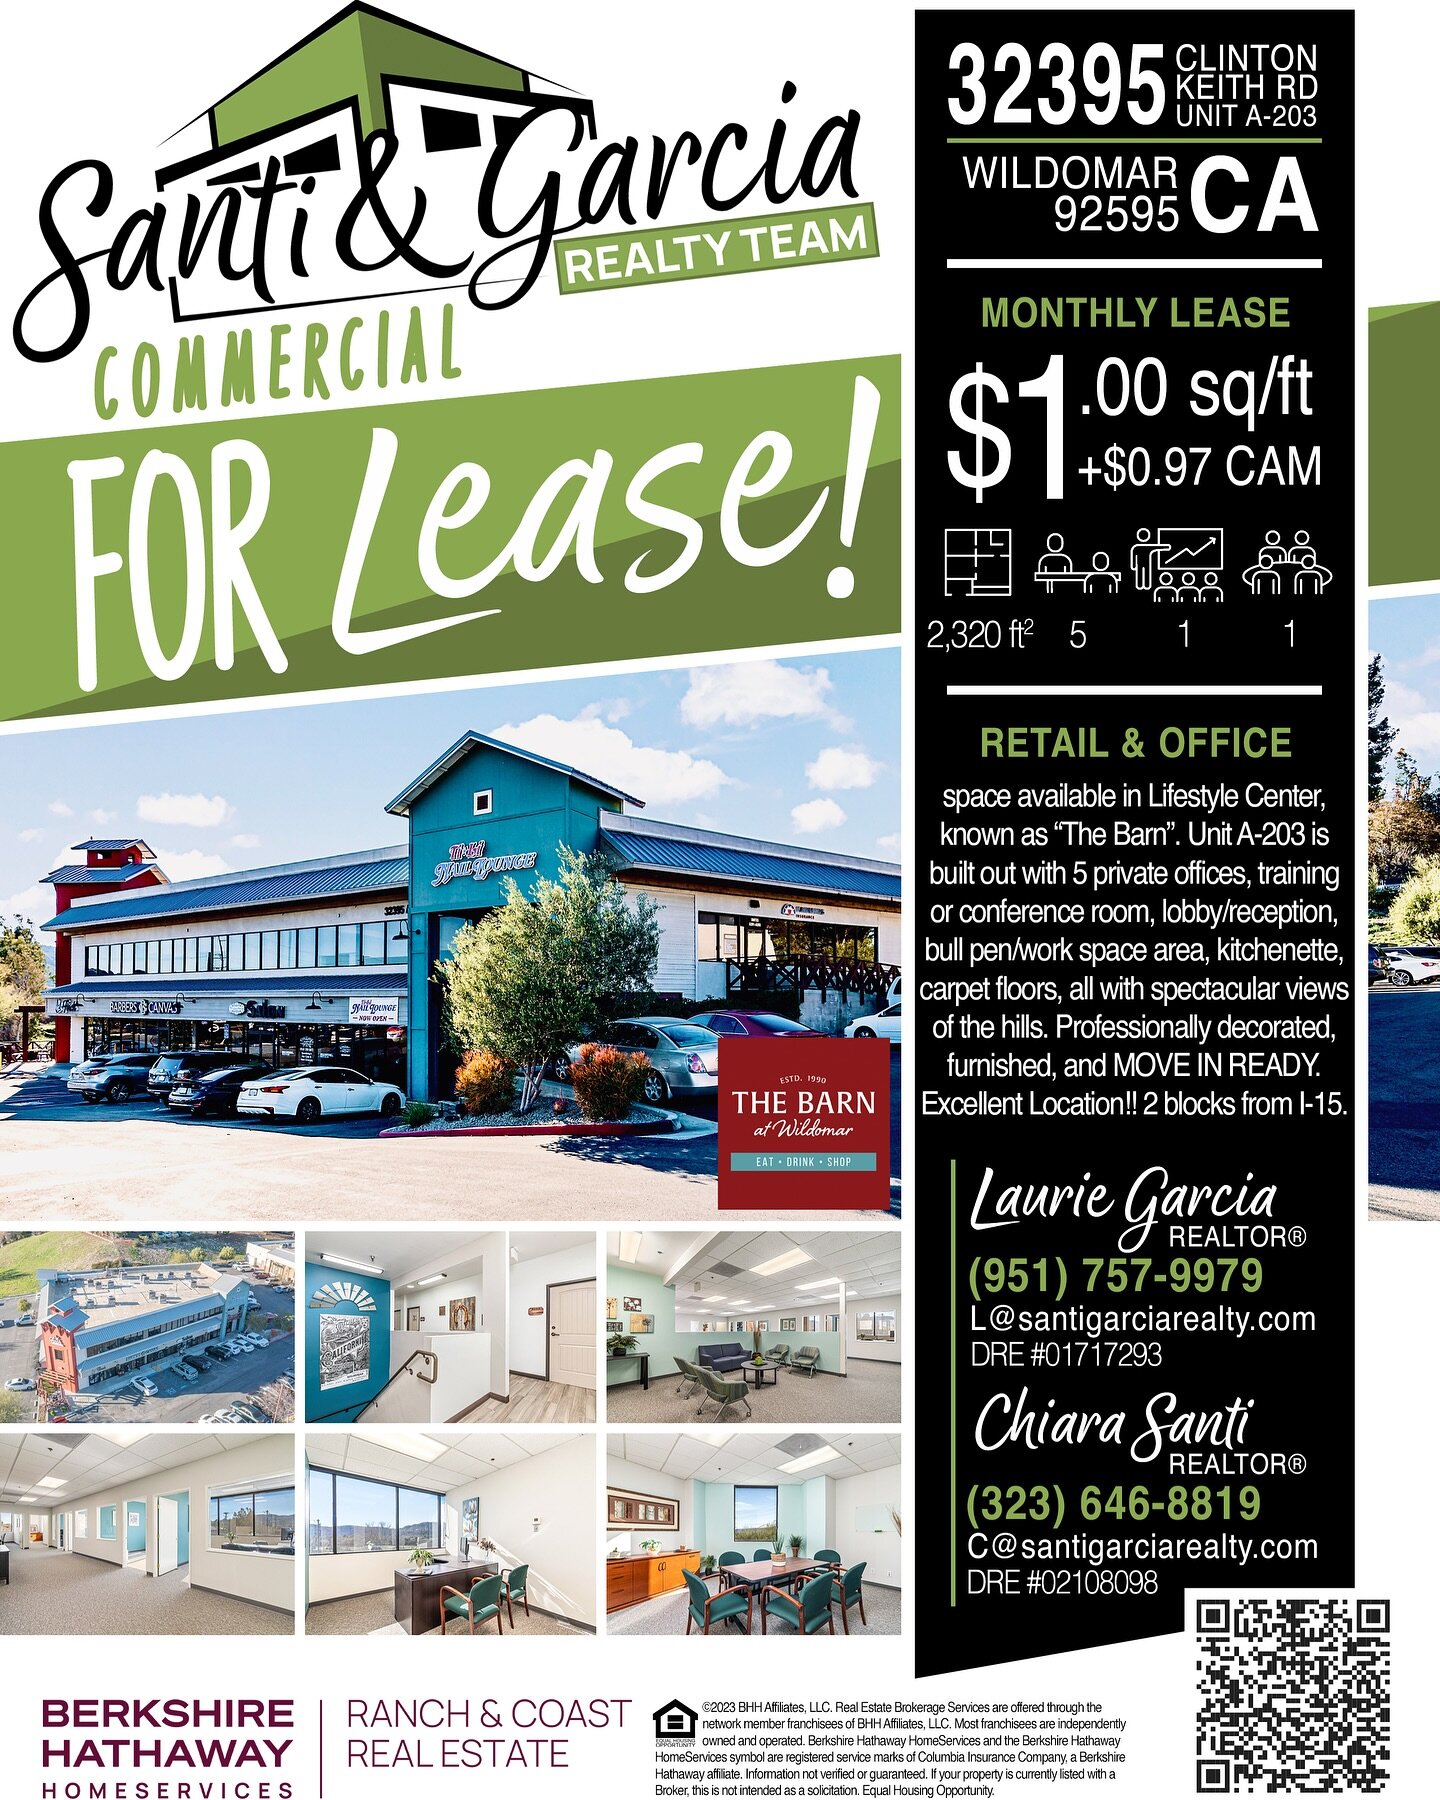 📌FOR LEASE‼️

📍32395 Clinton Keith Rd, Unit A-203, Wildomar, CA. 92595

👉More info at santigarciarealty.com

#SantiGarciaRealty #realestate #realtor #realty #carealestategroup #commercialrealestate #residentialrealestate